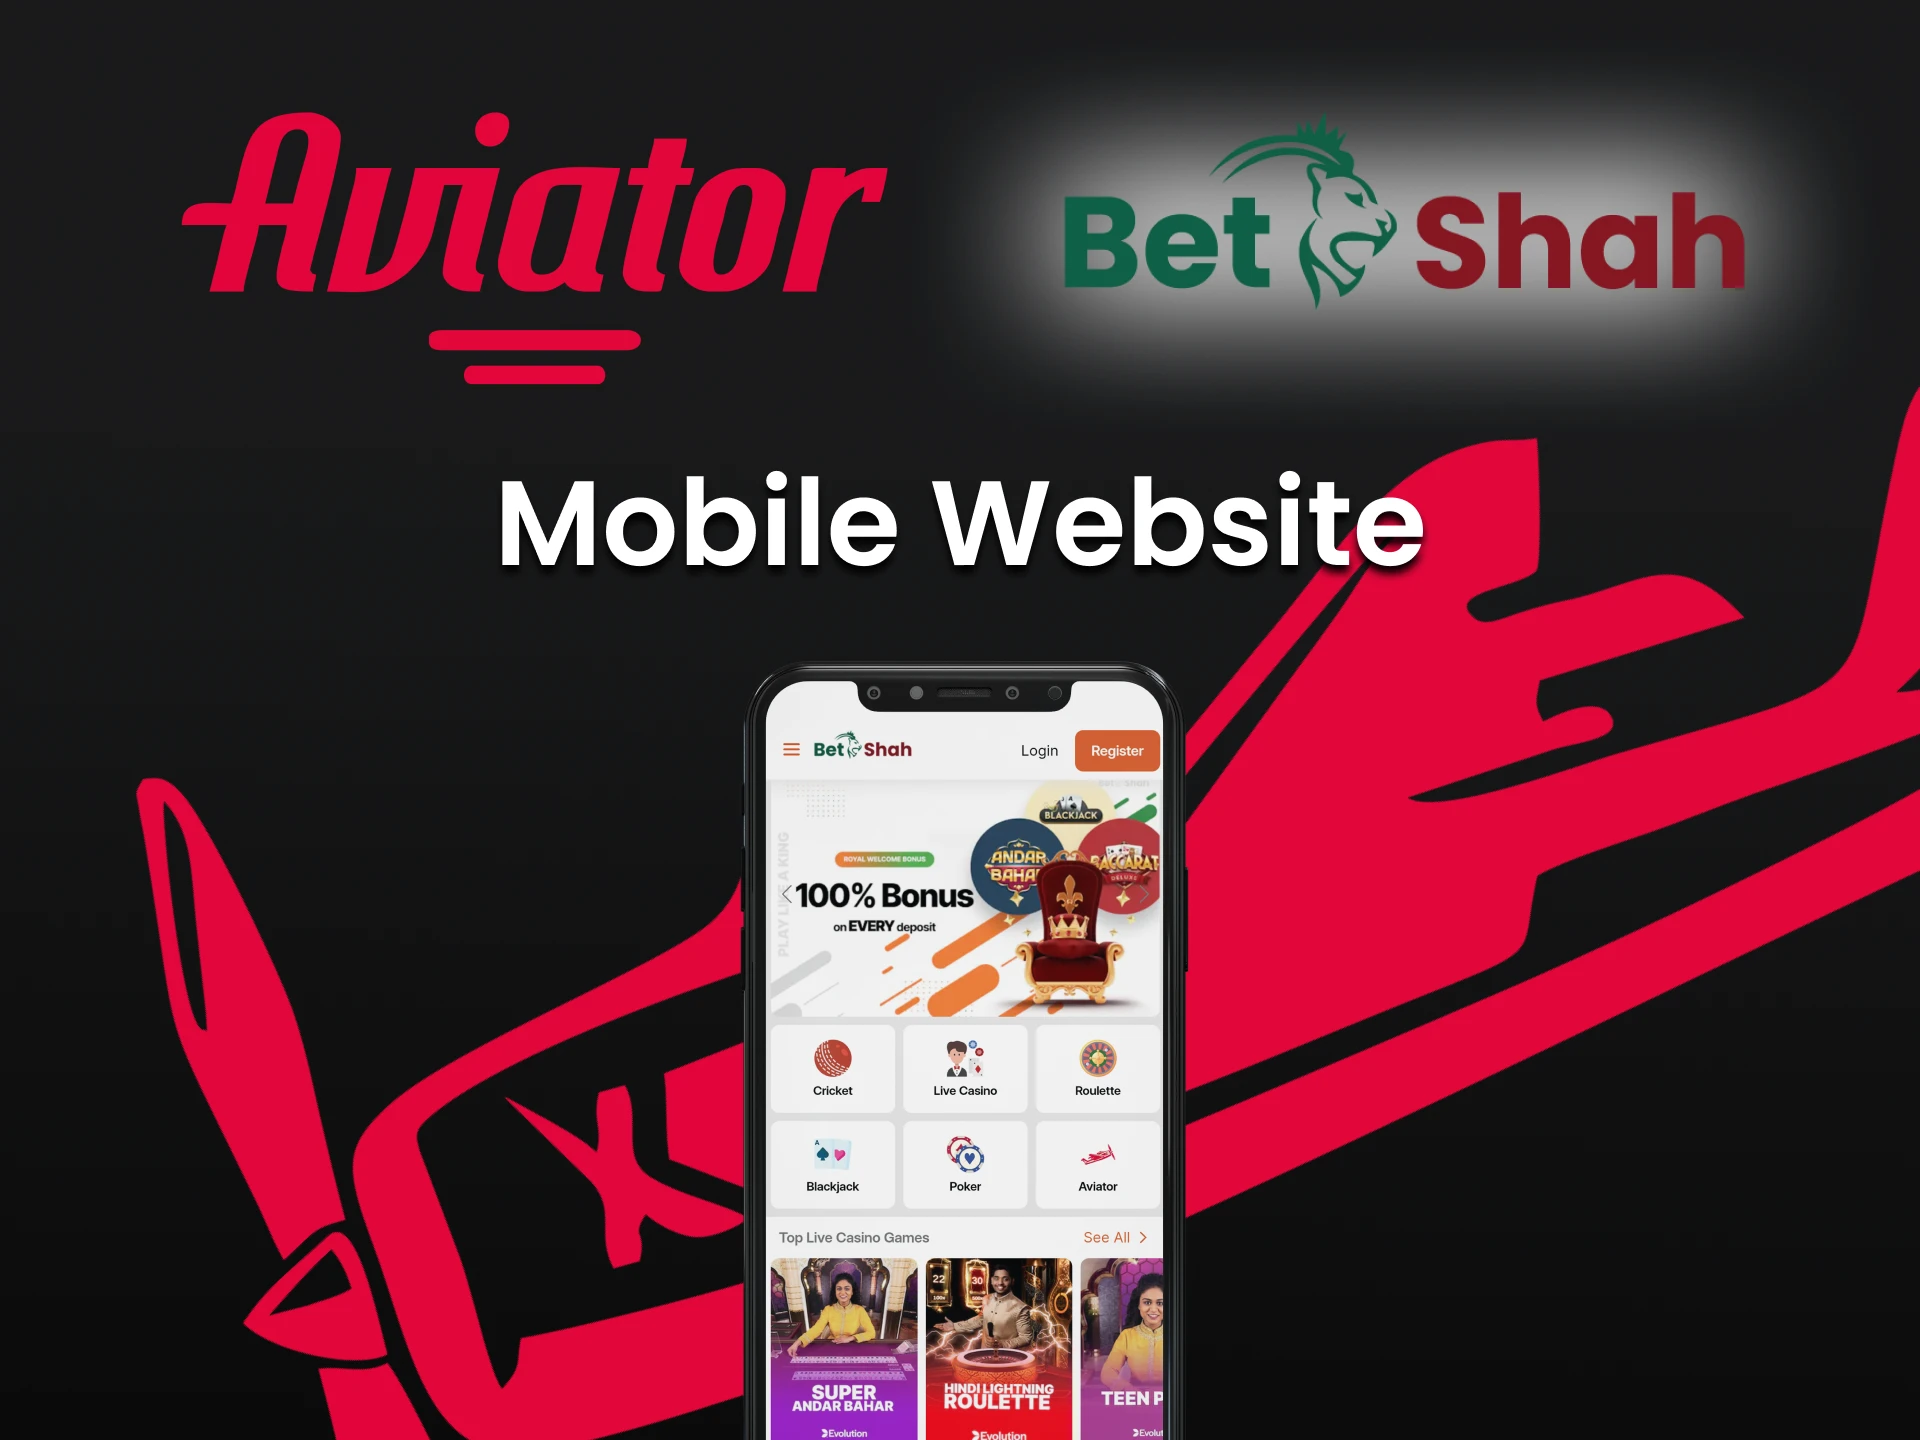 Visit the mobile site to play Aviator at BetShah.